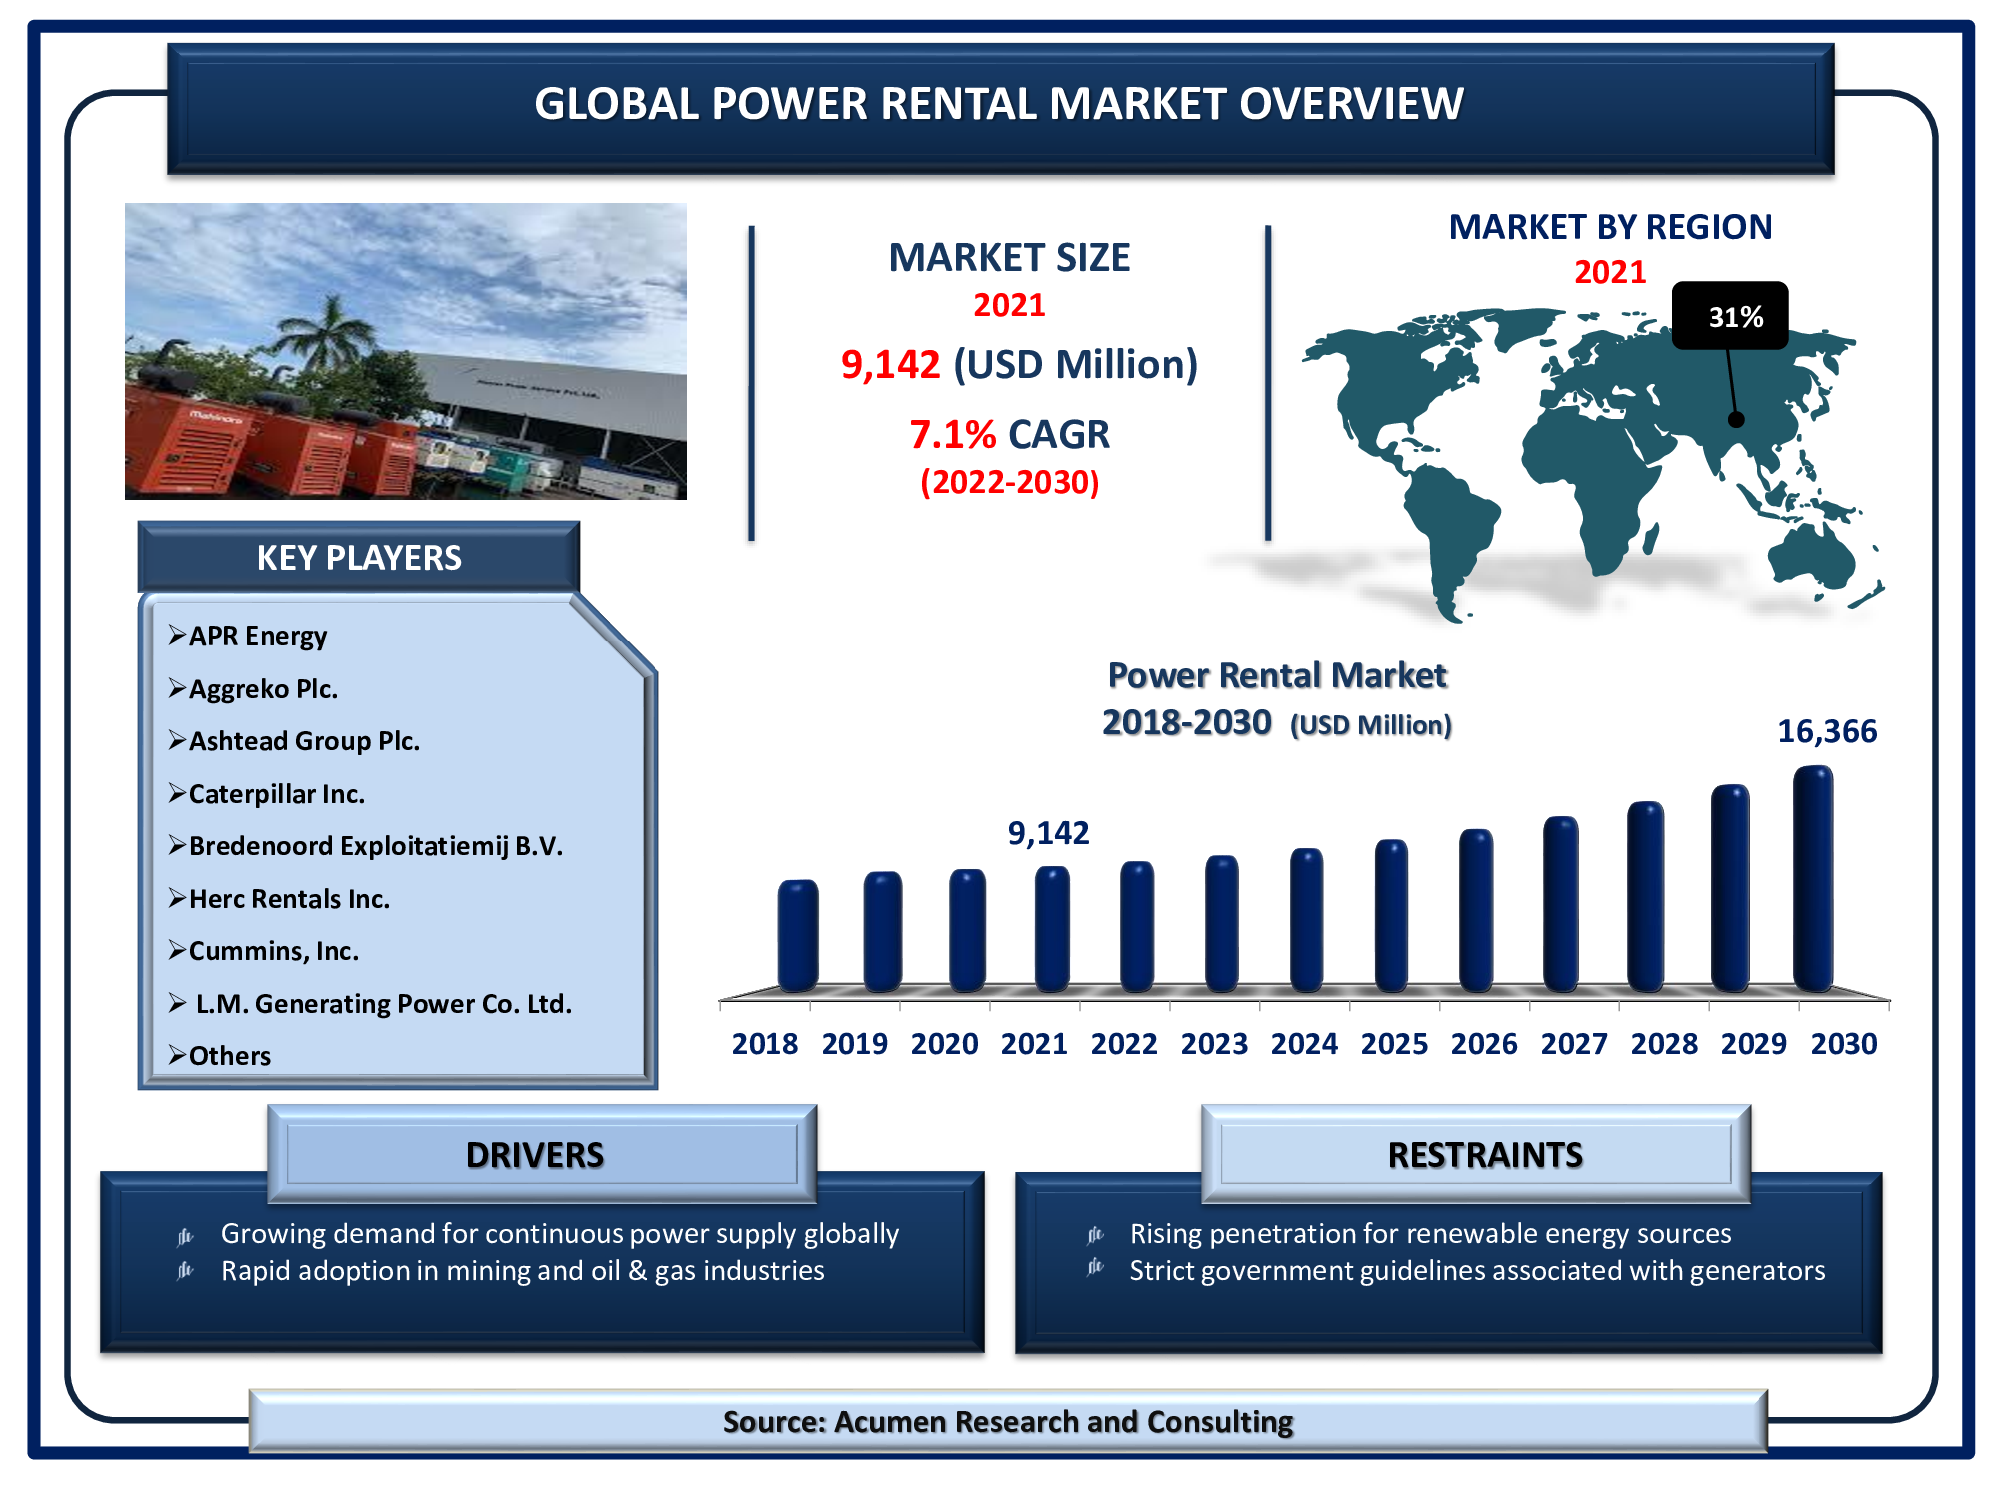 The Global Power Rental Market Size is valued at USD 9,142 million in 2021 and is estimated to achieve a market size of USD 16,366 million by 2030; growing at a CAGR of 7.1%.